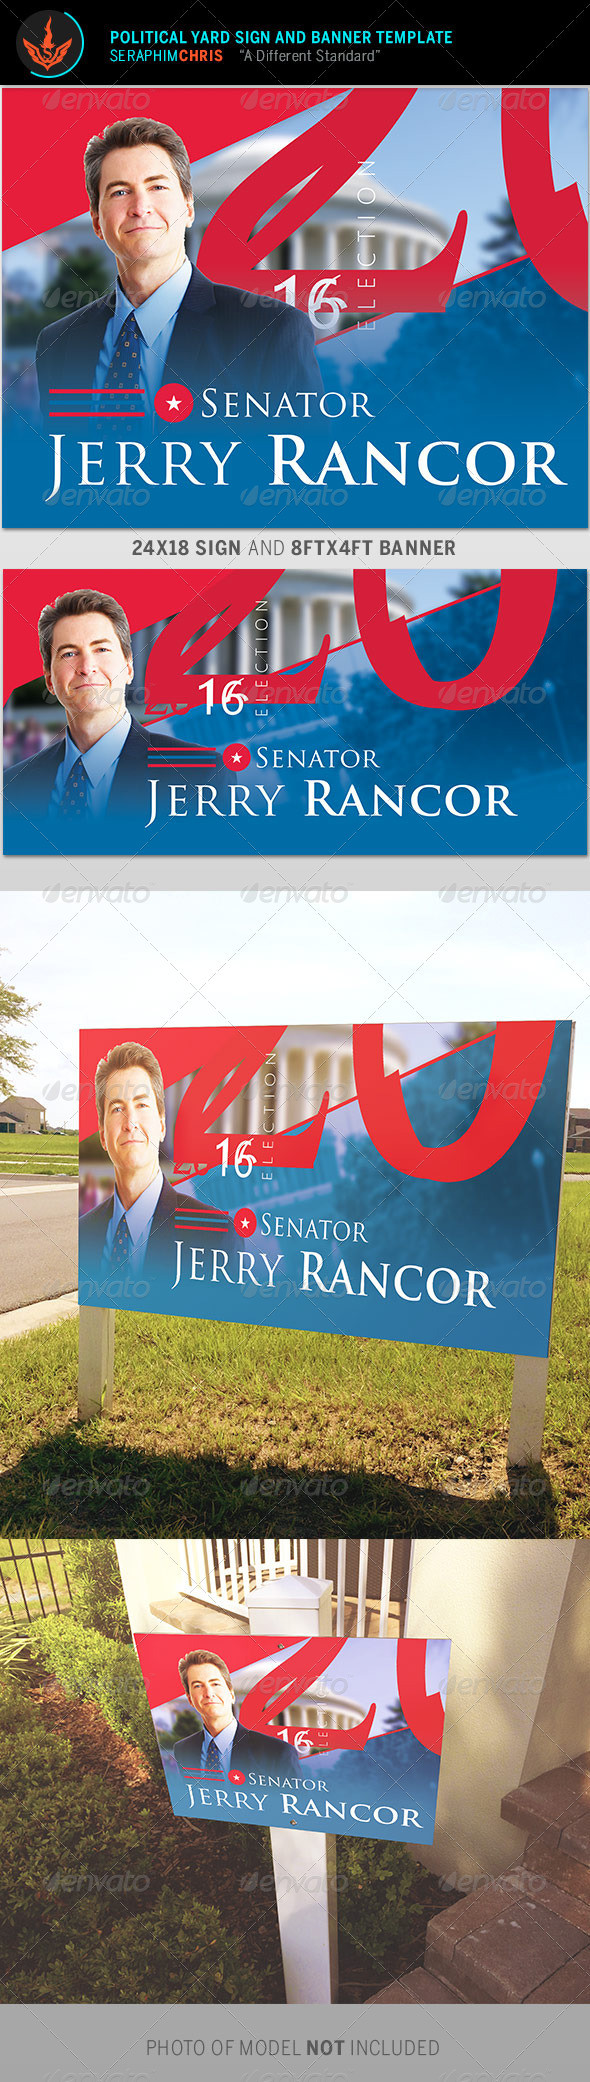 Political yard sign and banner template preview